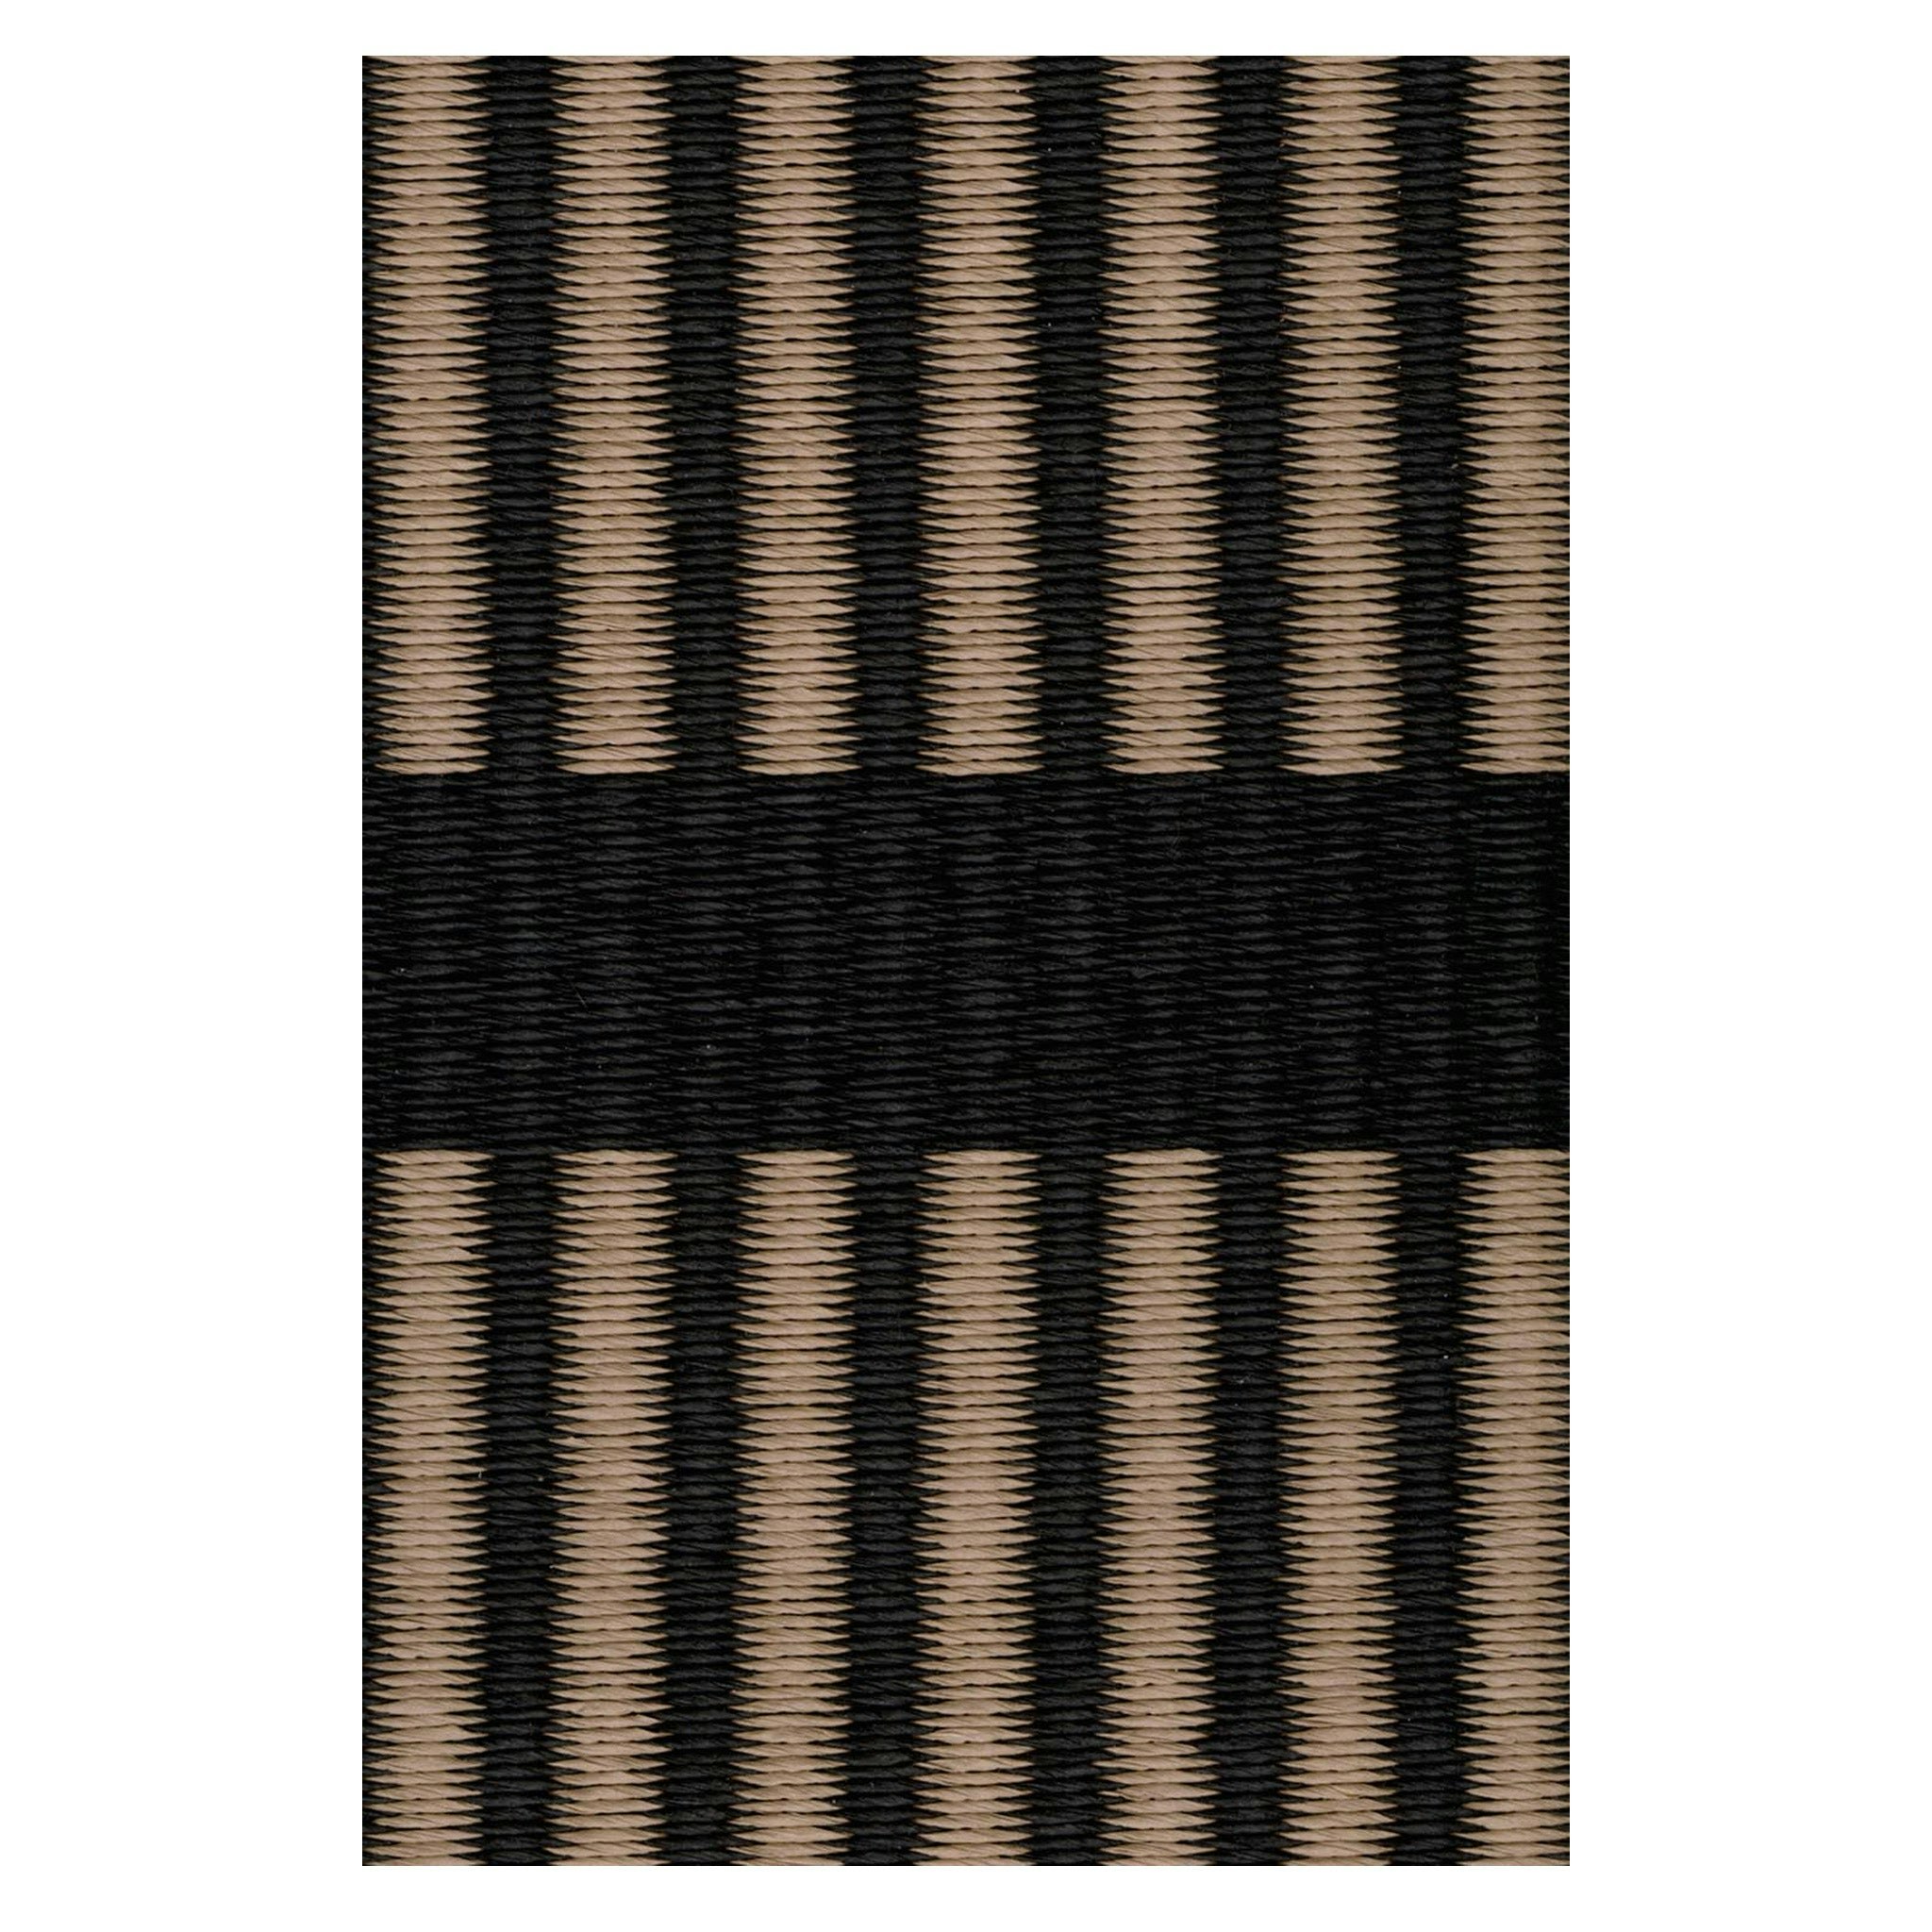 Cut Stripe Rug by Ritva Puotila for Woodnotes